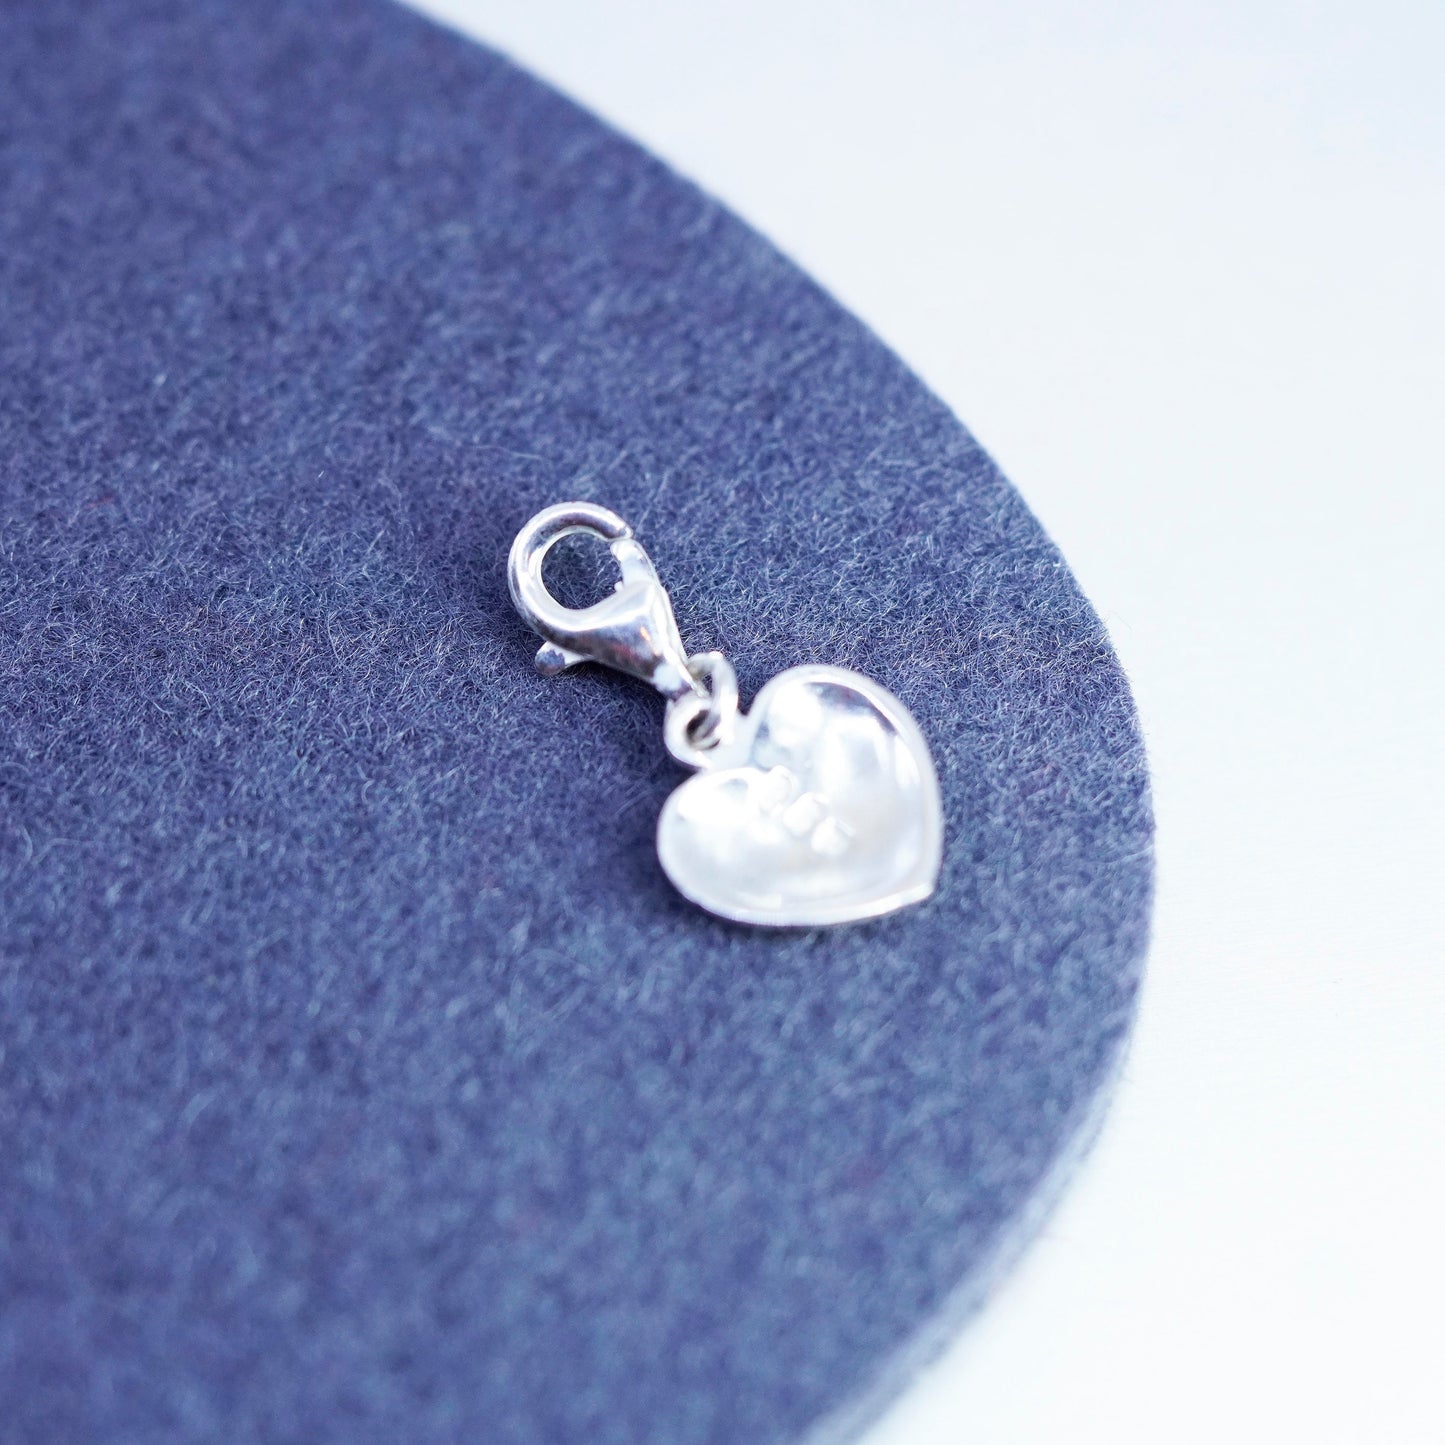 Vintage sterling 925 silver heart charm pendant with sister